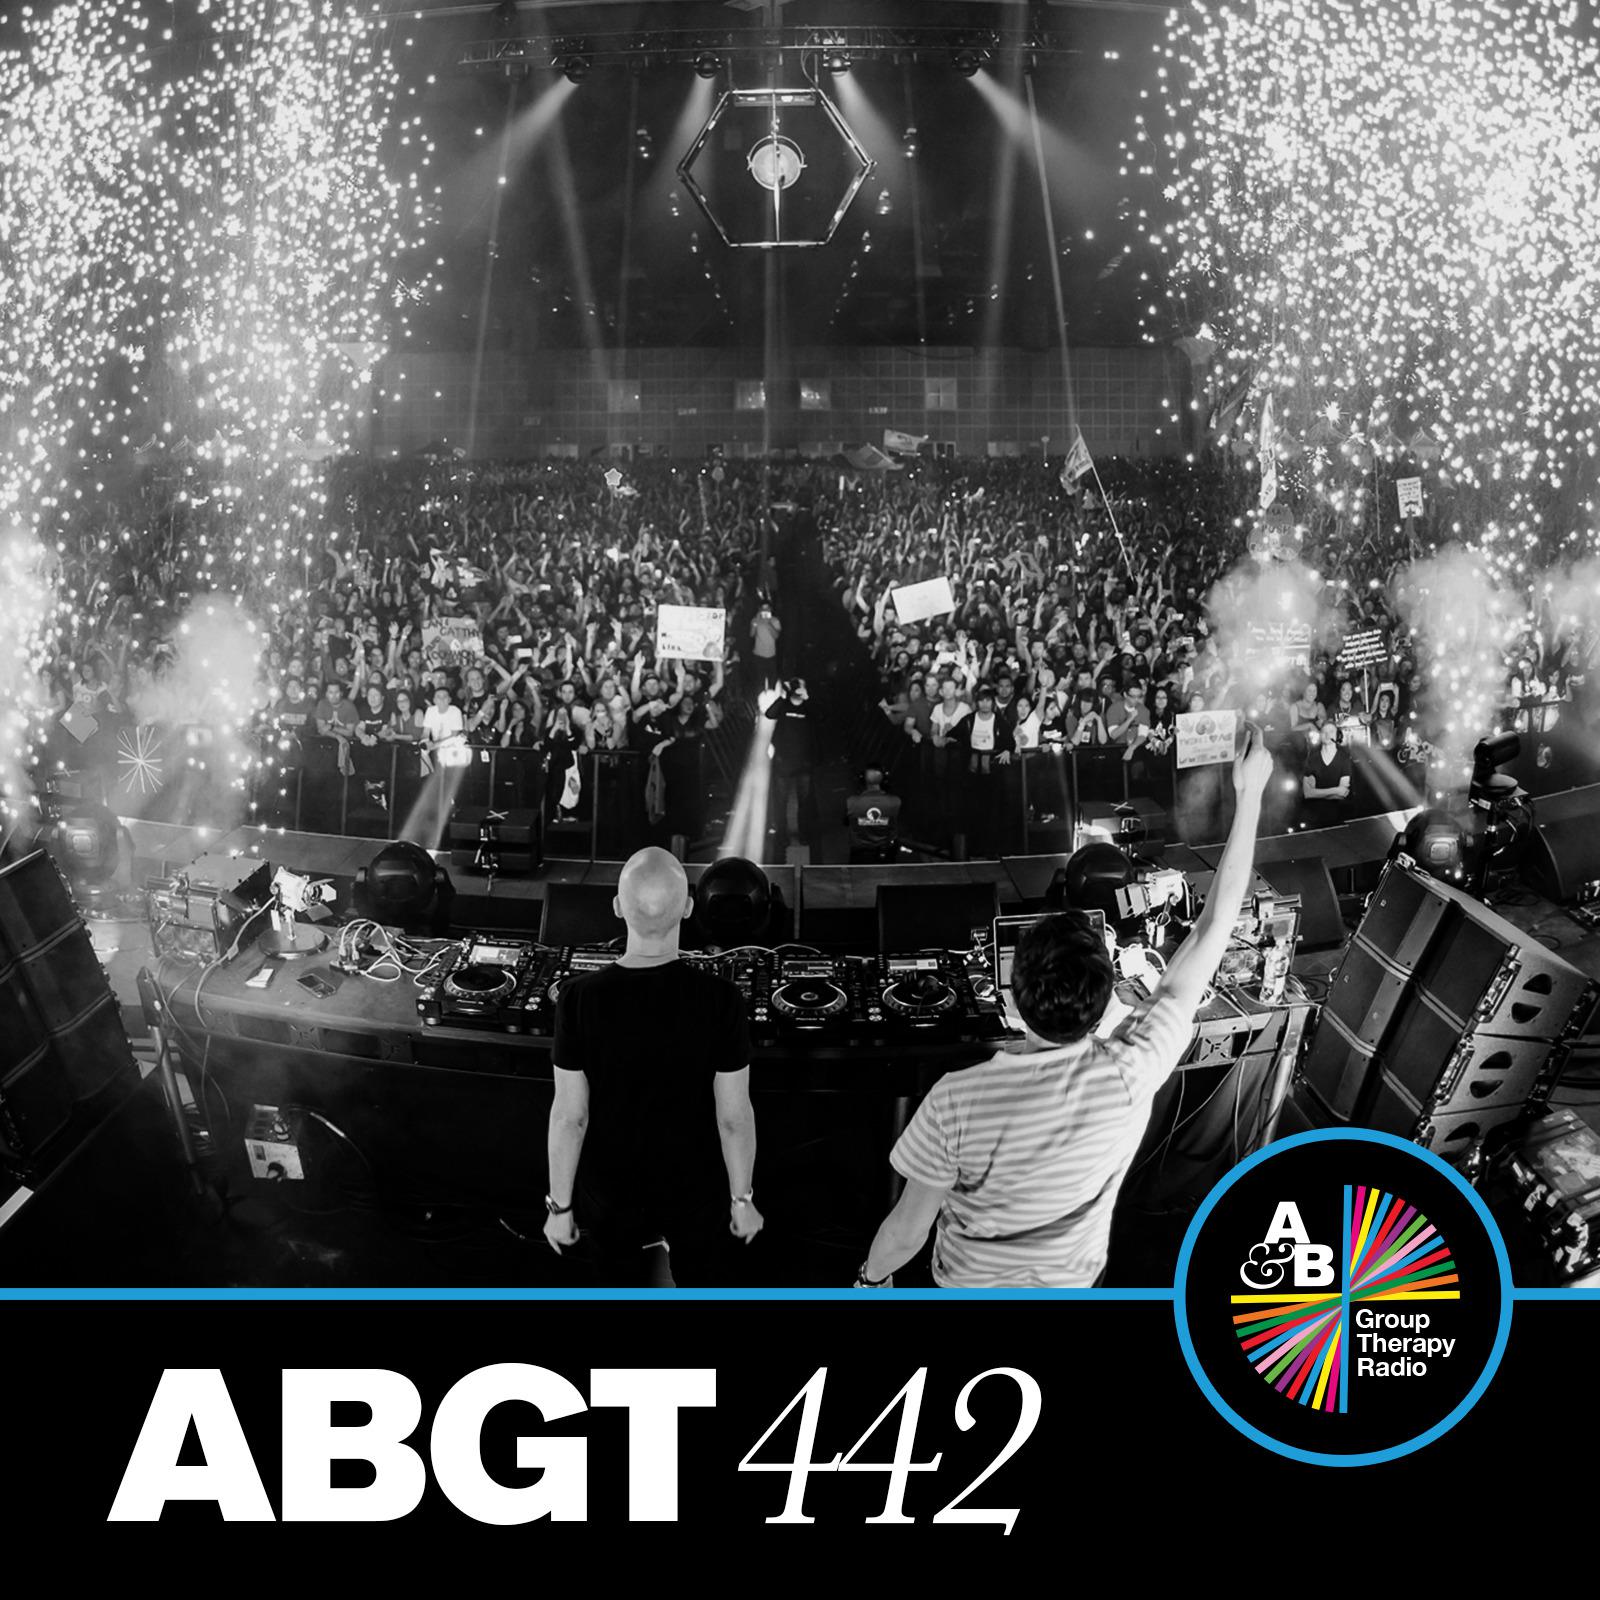 Seven Lions - Returning To You (ABGT442)